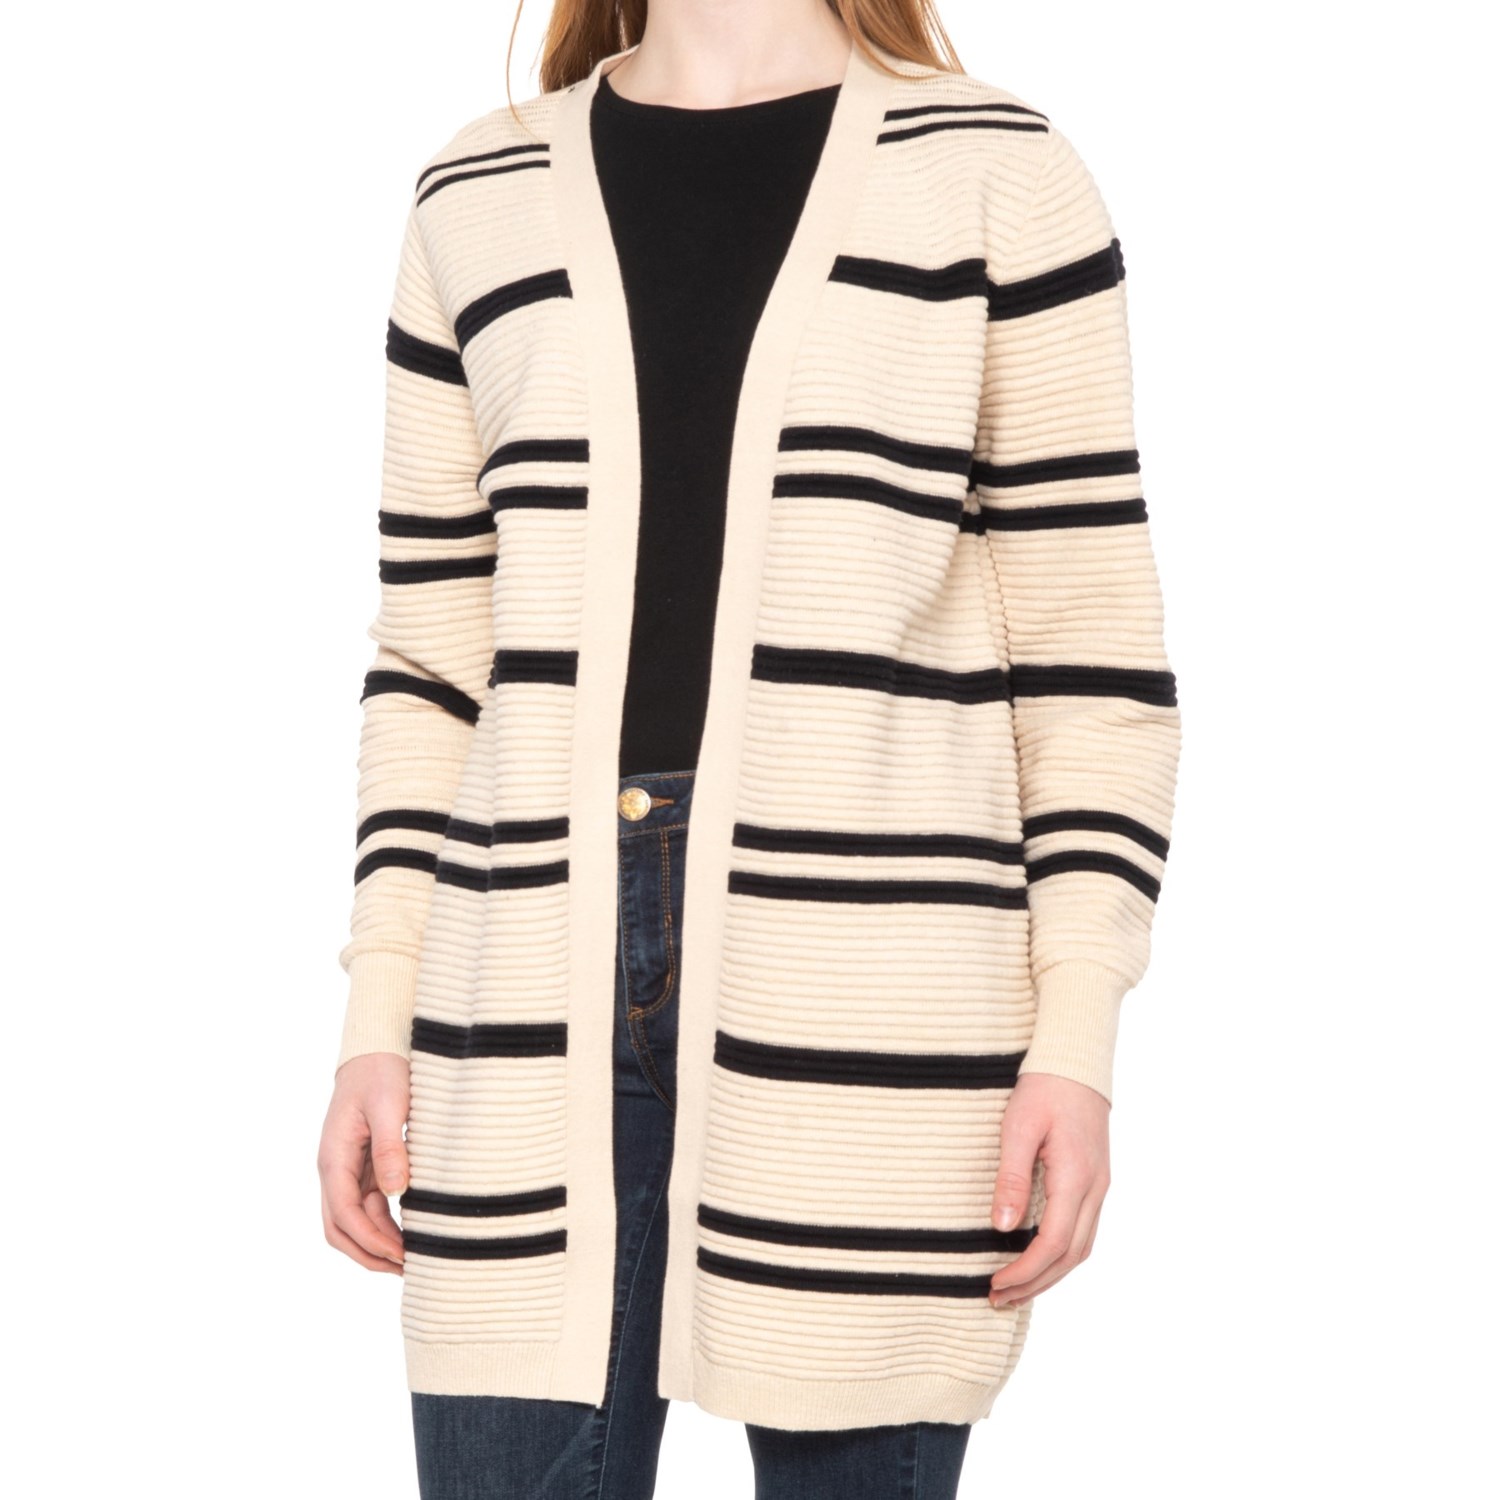 Roxy Above the Sun Cardigan Sweater (For Women)